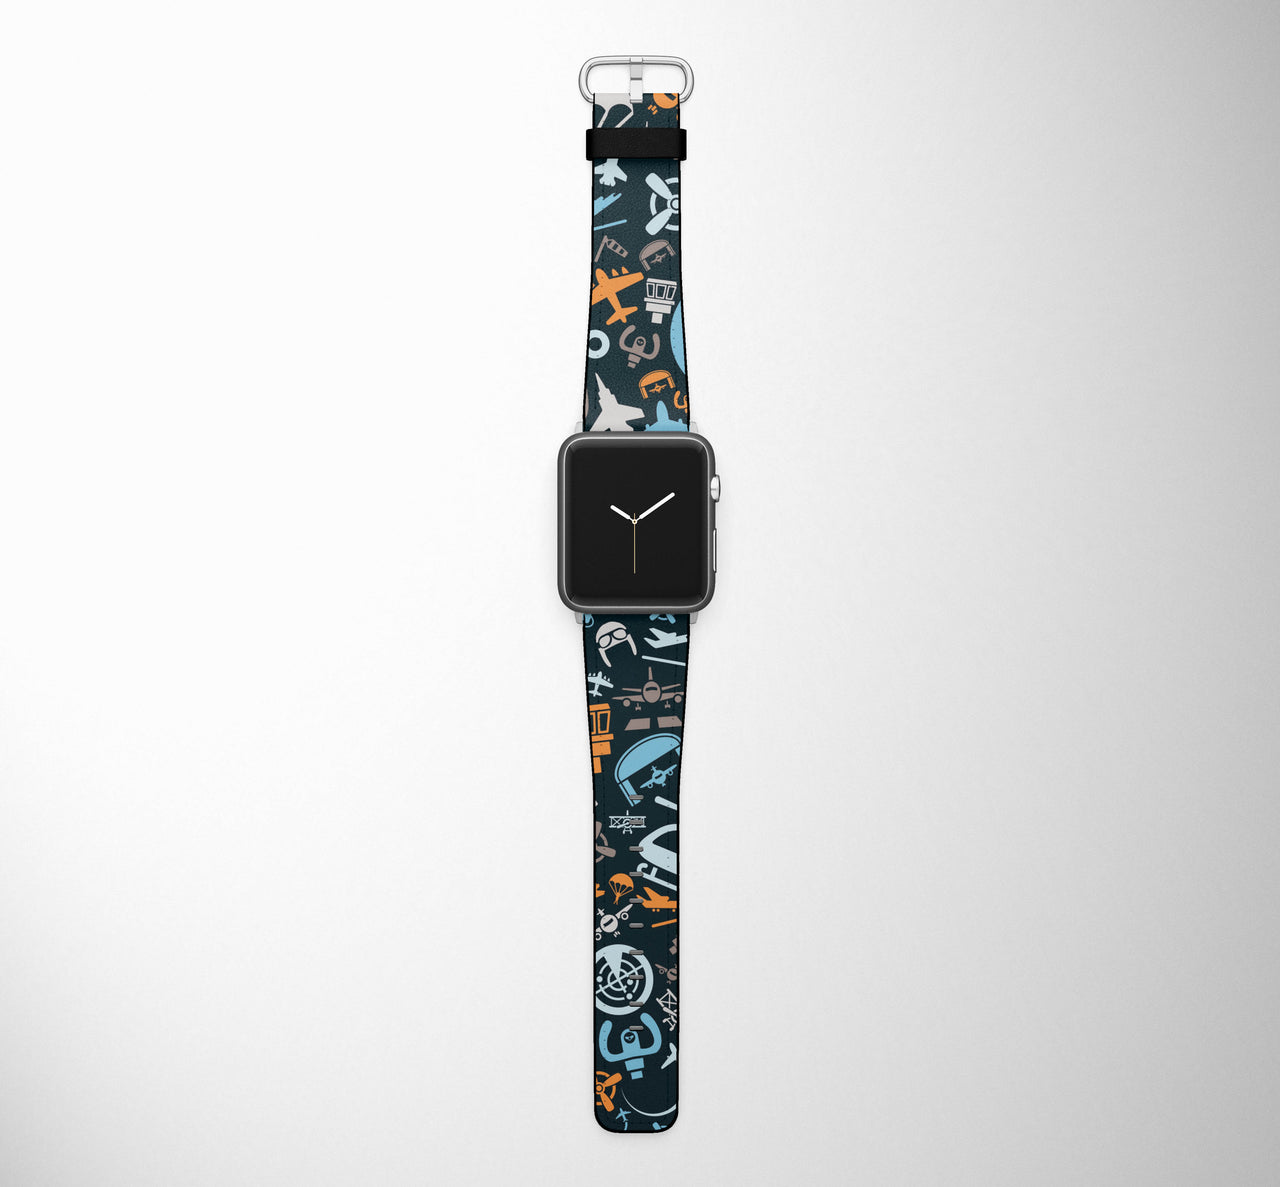 Aviation Icons Designed Leather Apple Watch Straps